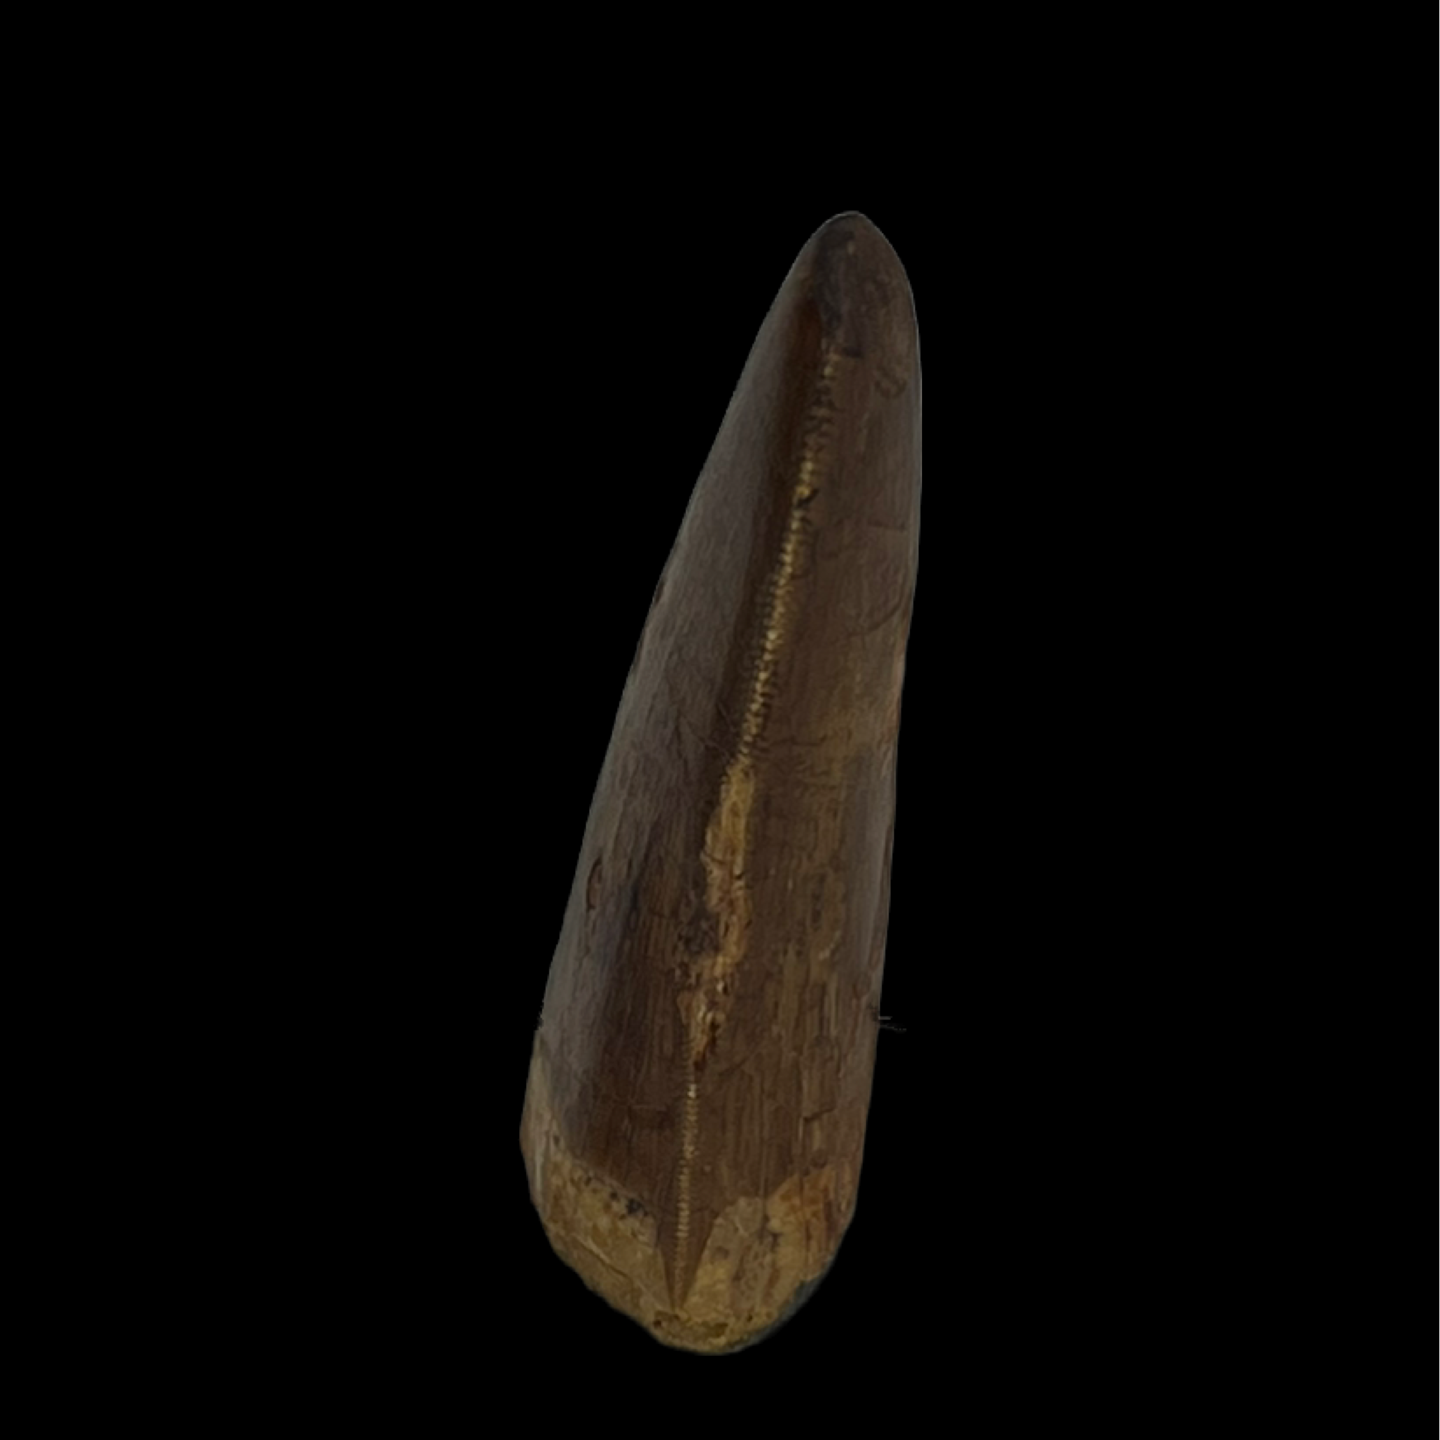 Carcharodontosaurus Tooth 01 (2 in)